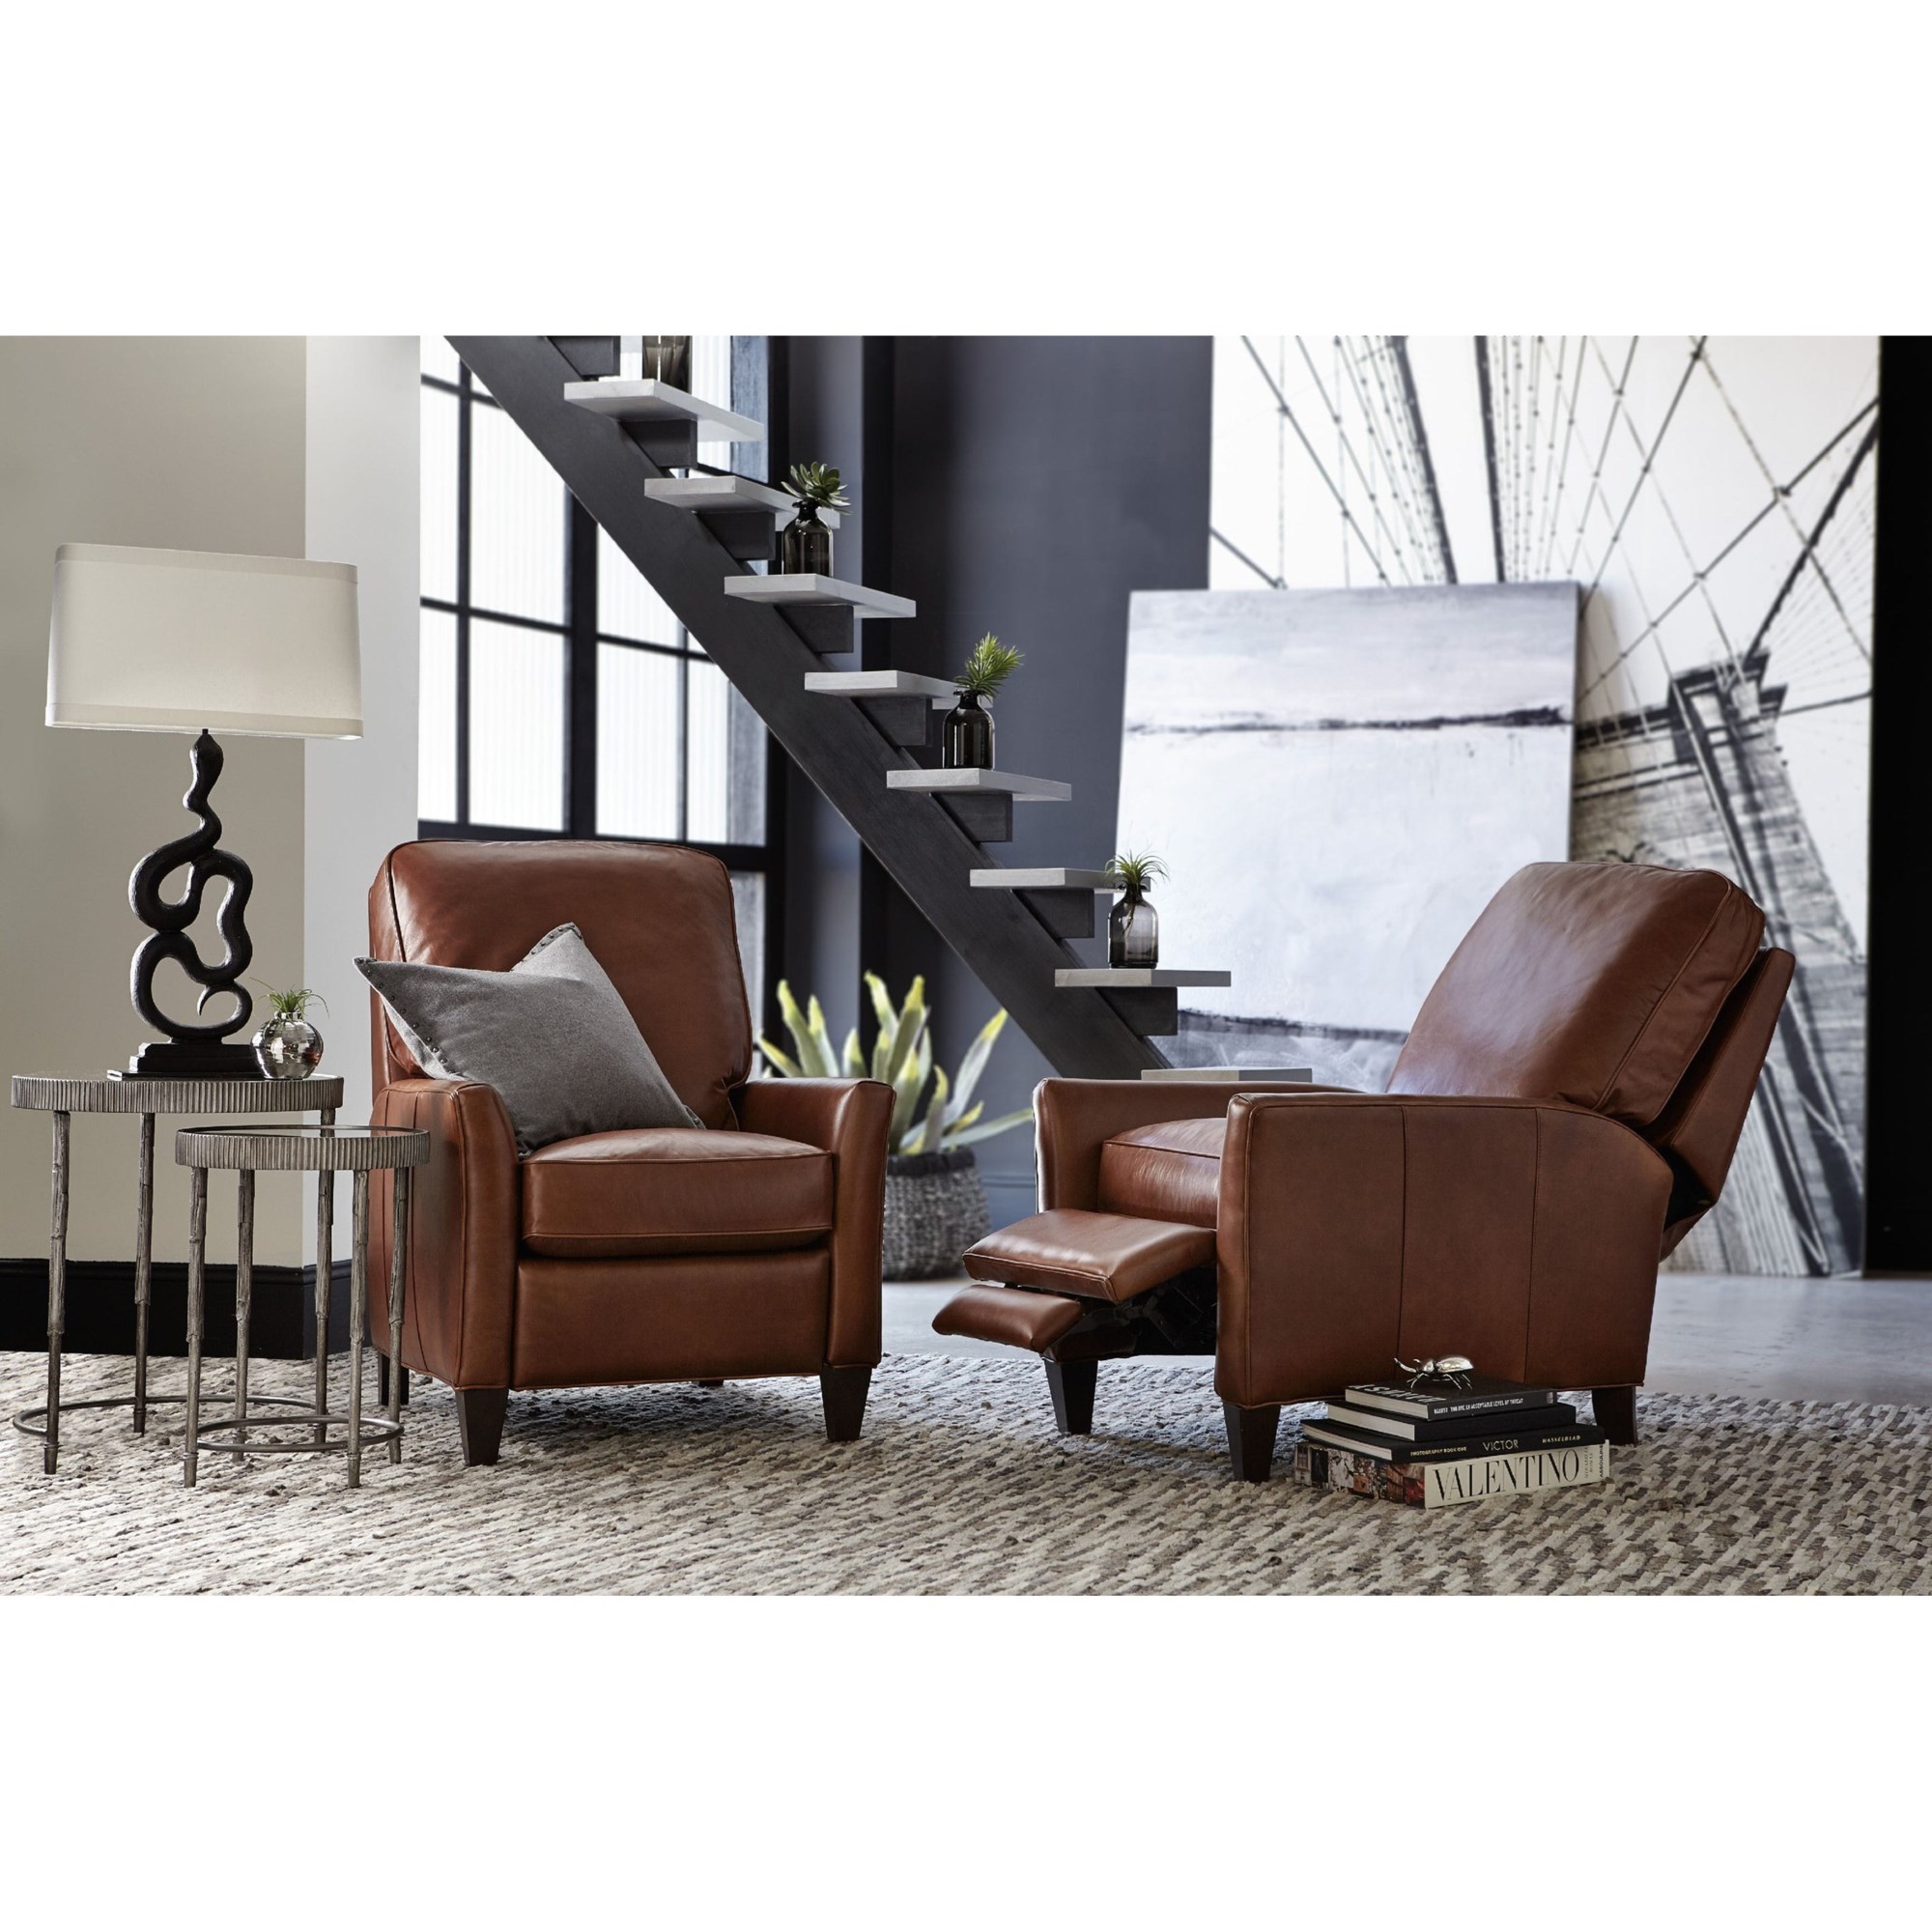 https://imageresizer4.furnituredealer.net/img/remote/images.furnituredealer.net/img/products/hooker_furniture/color/seven%20seas%20seating%20-%20reclining%20chairs_rc127-085-b3.jpg?width=2000&height=2000&scale=both